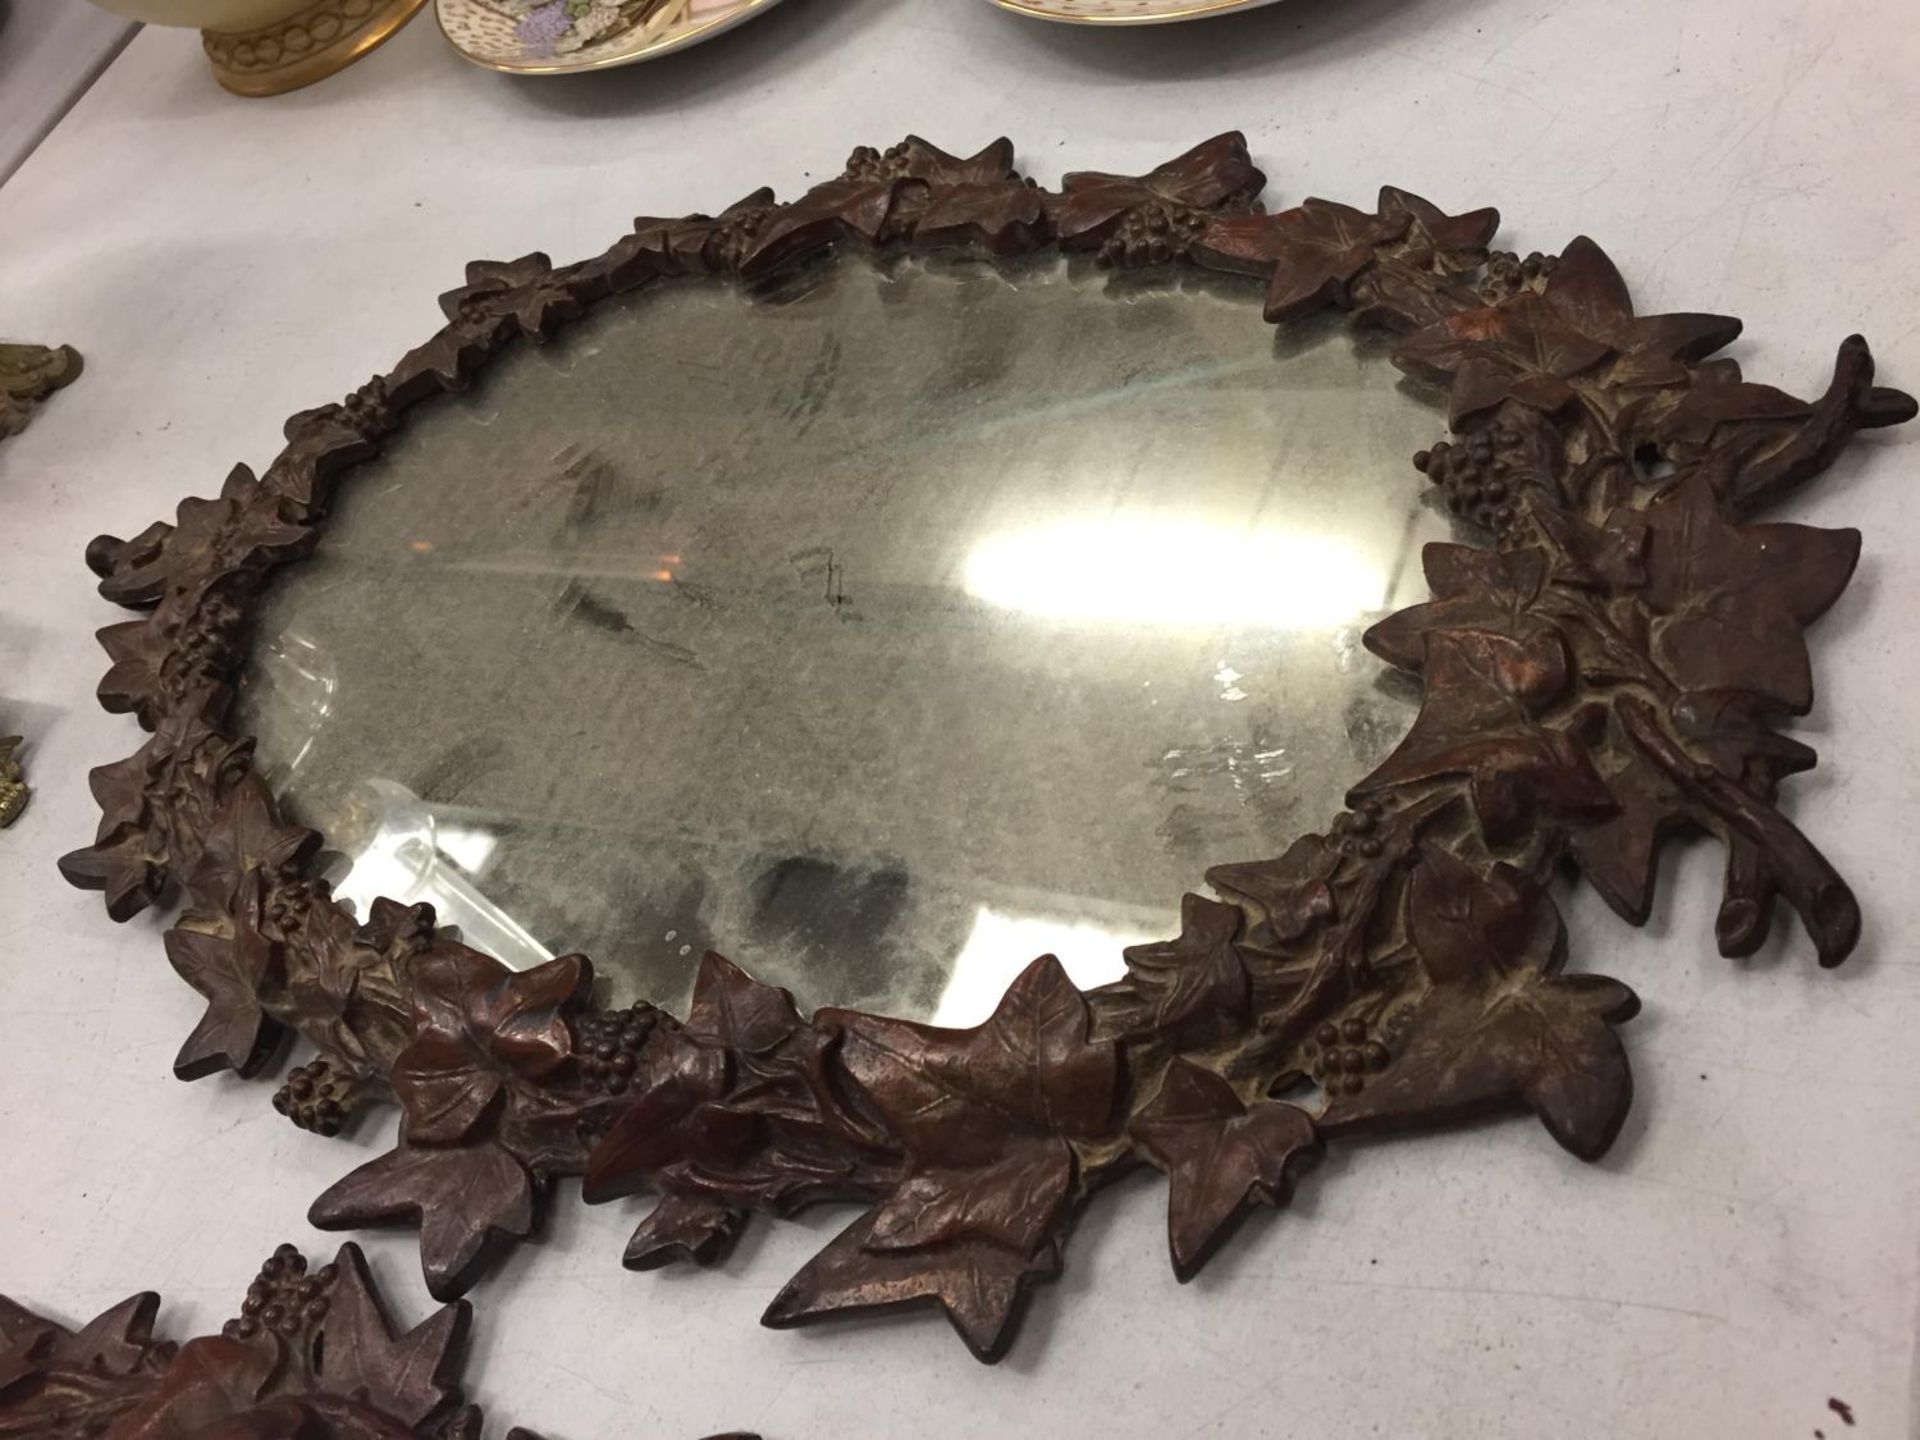 A PAIR OF HEAVY MATCHING WALL MIRRORS WITH ORNATE LEAF DESIGN - Image 3 of 6